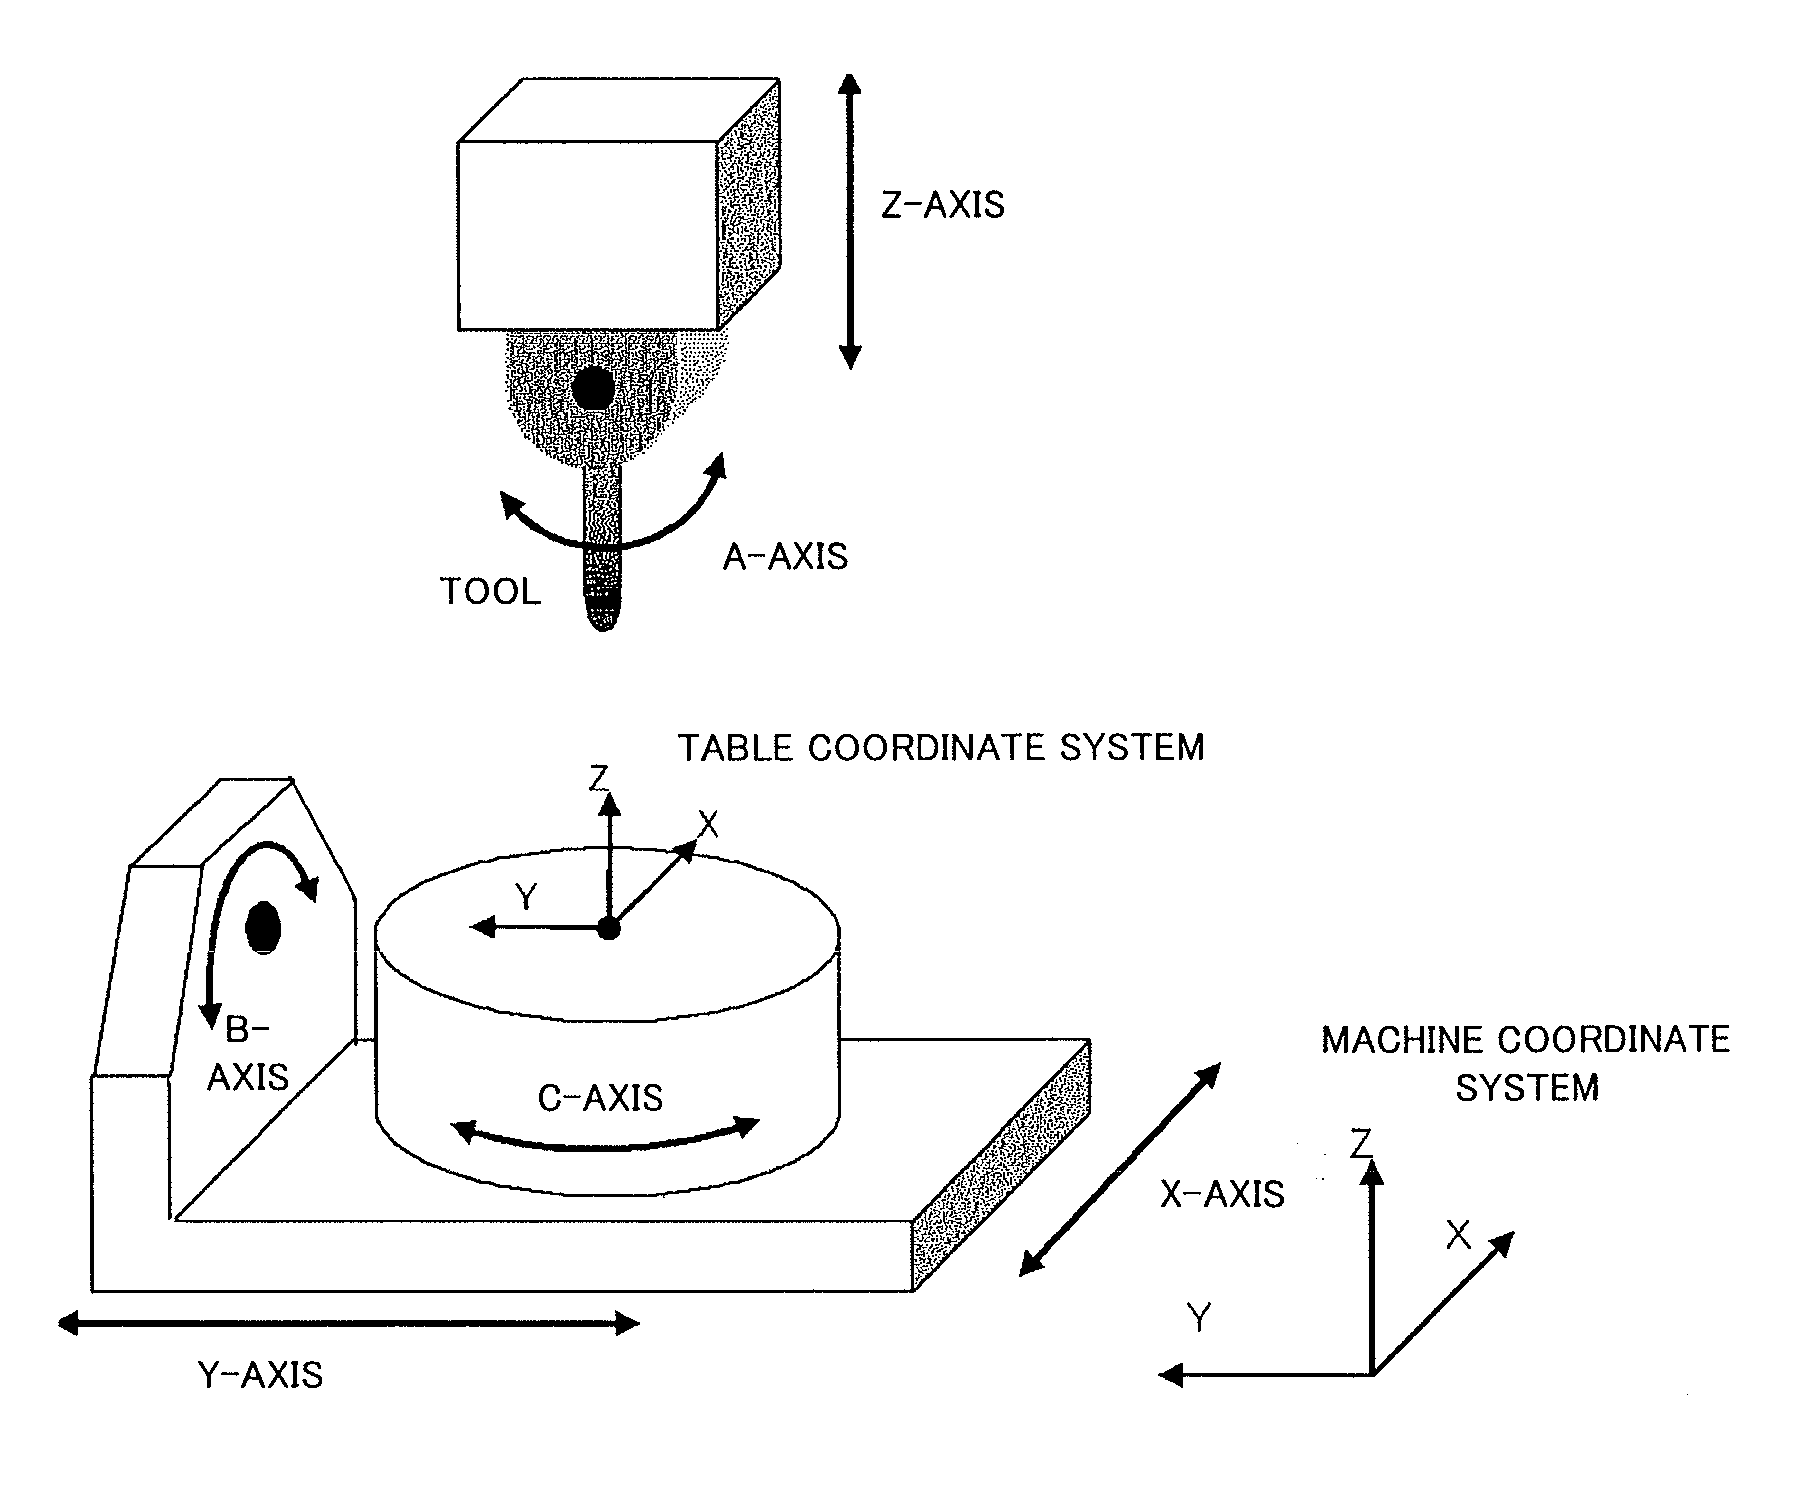 Numerical controller for multi-axis machine